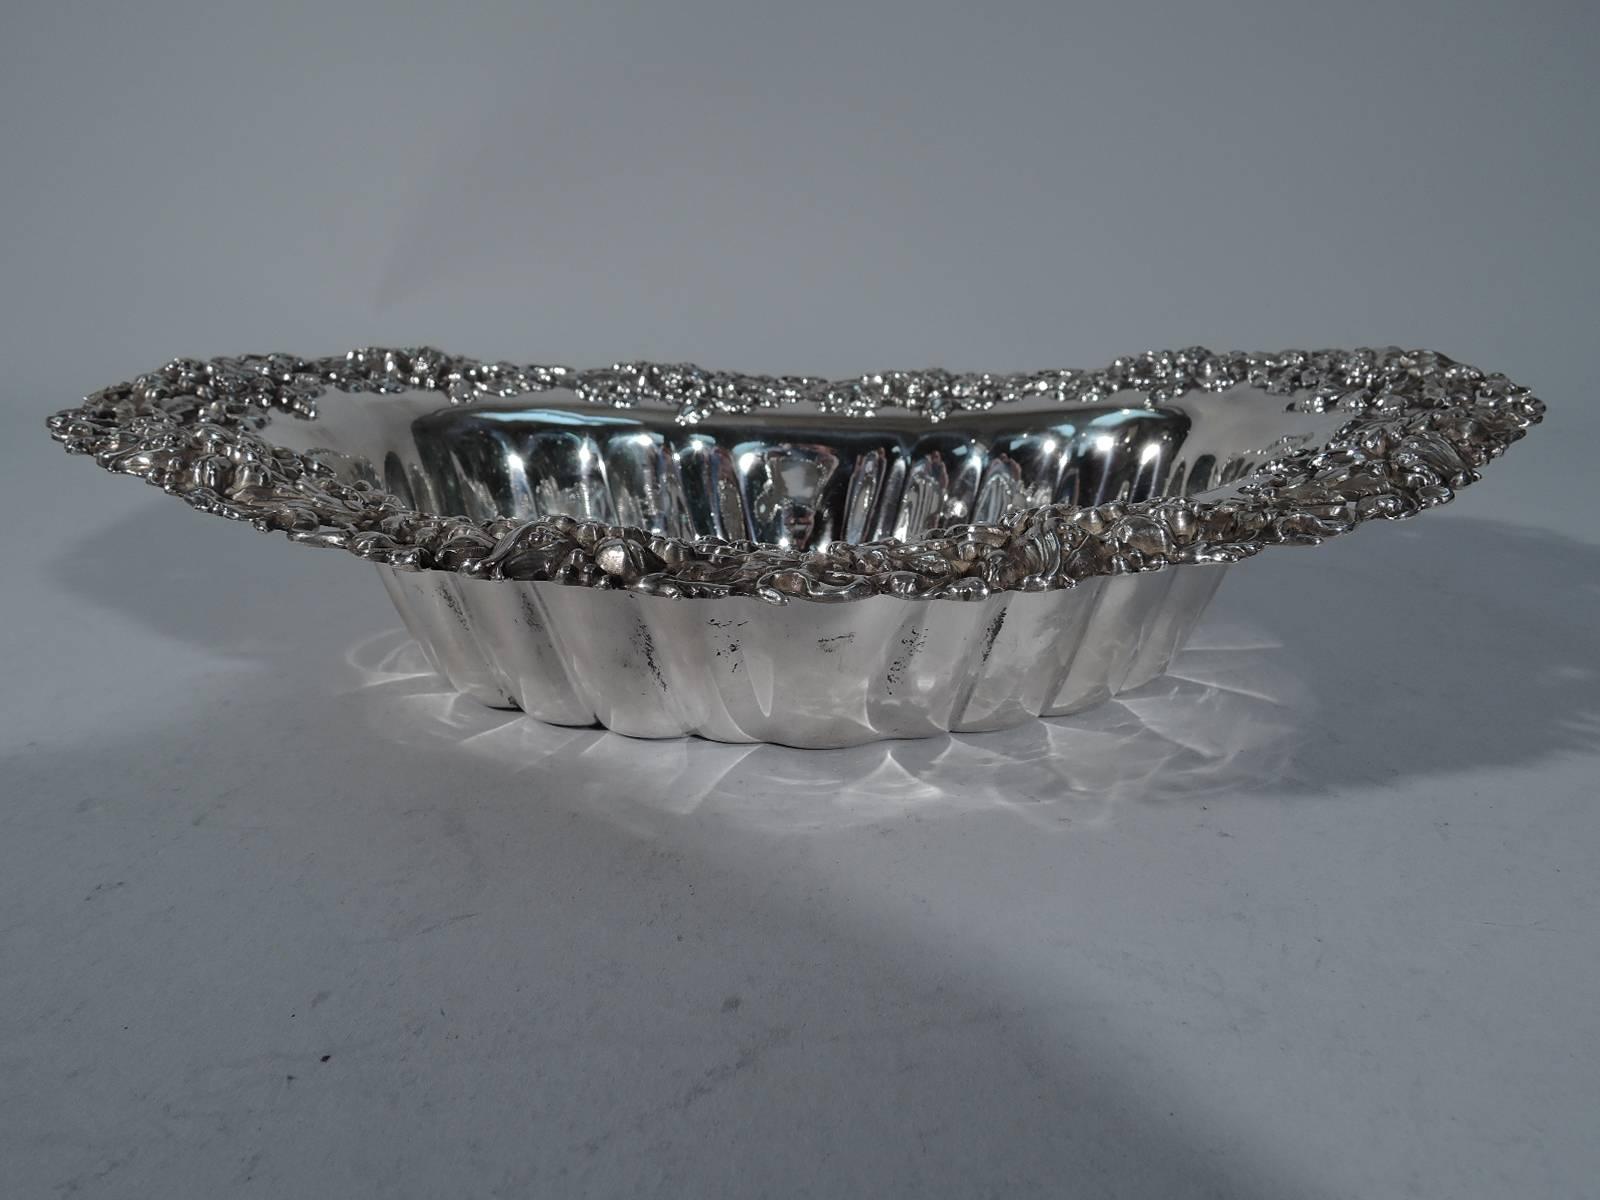 Sterling silver serving bowl. Made by Mauser in New York, circa 1890. Oval and lobed bowl with fancy floral rim abounding in pierced blossoms and seed-bursting vegetation. Interlaced script monogram engraved in well. Hallmark includes 55014. Very